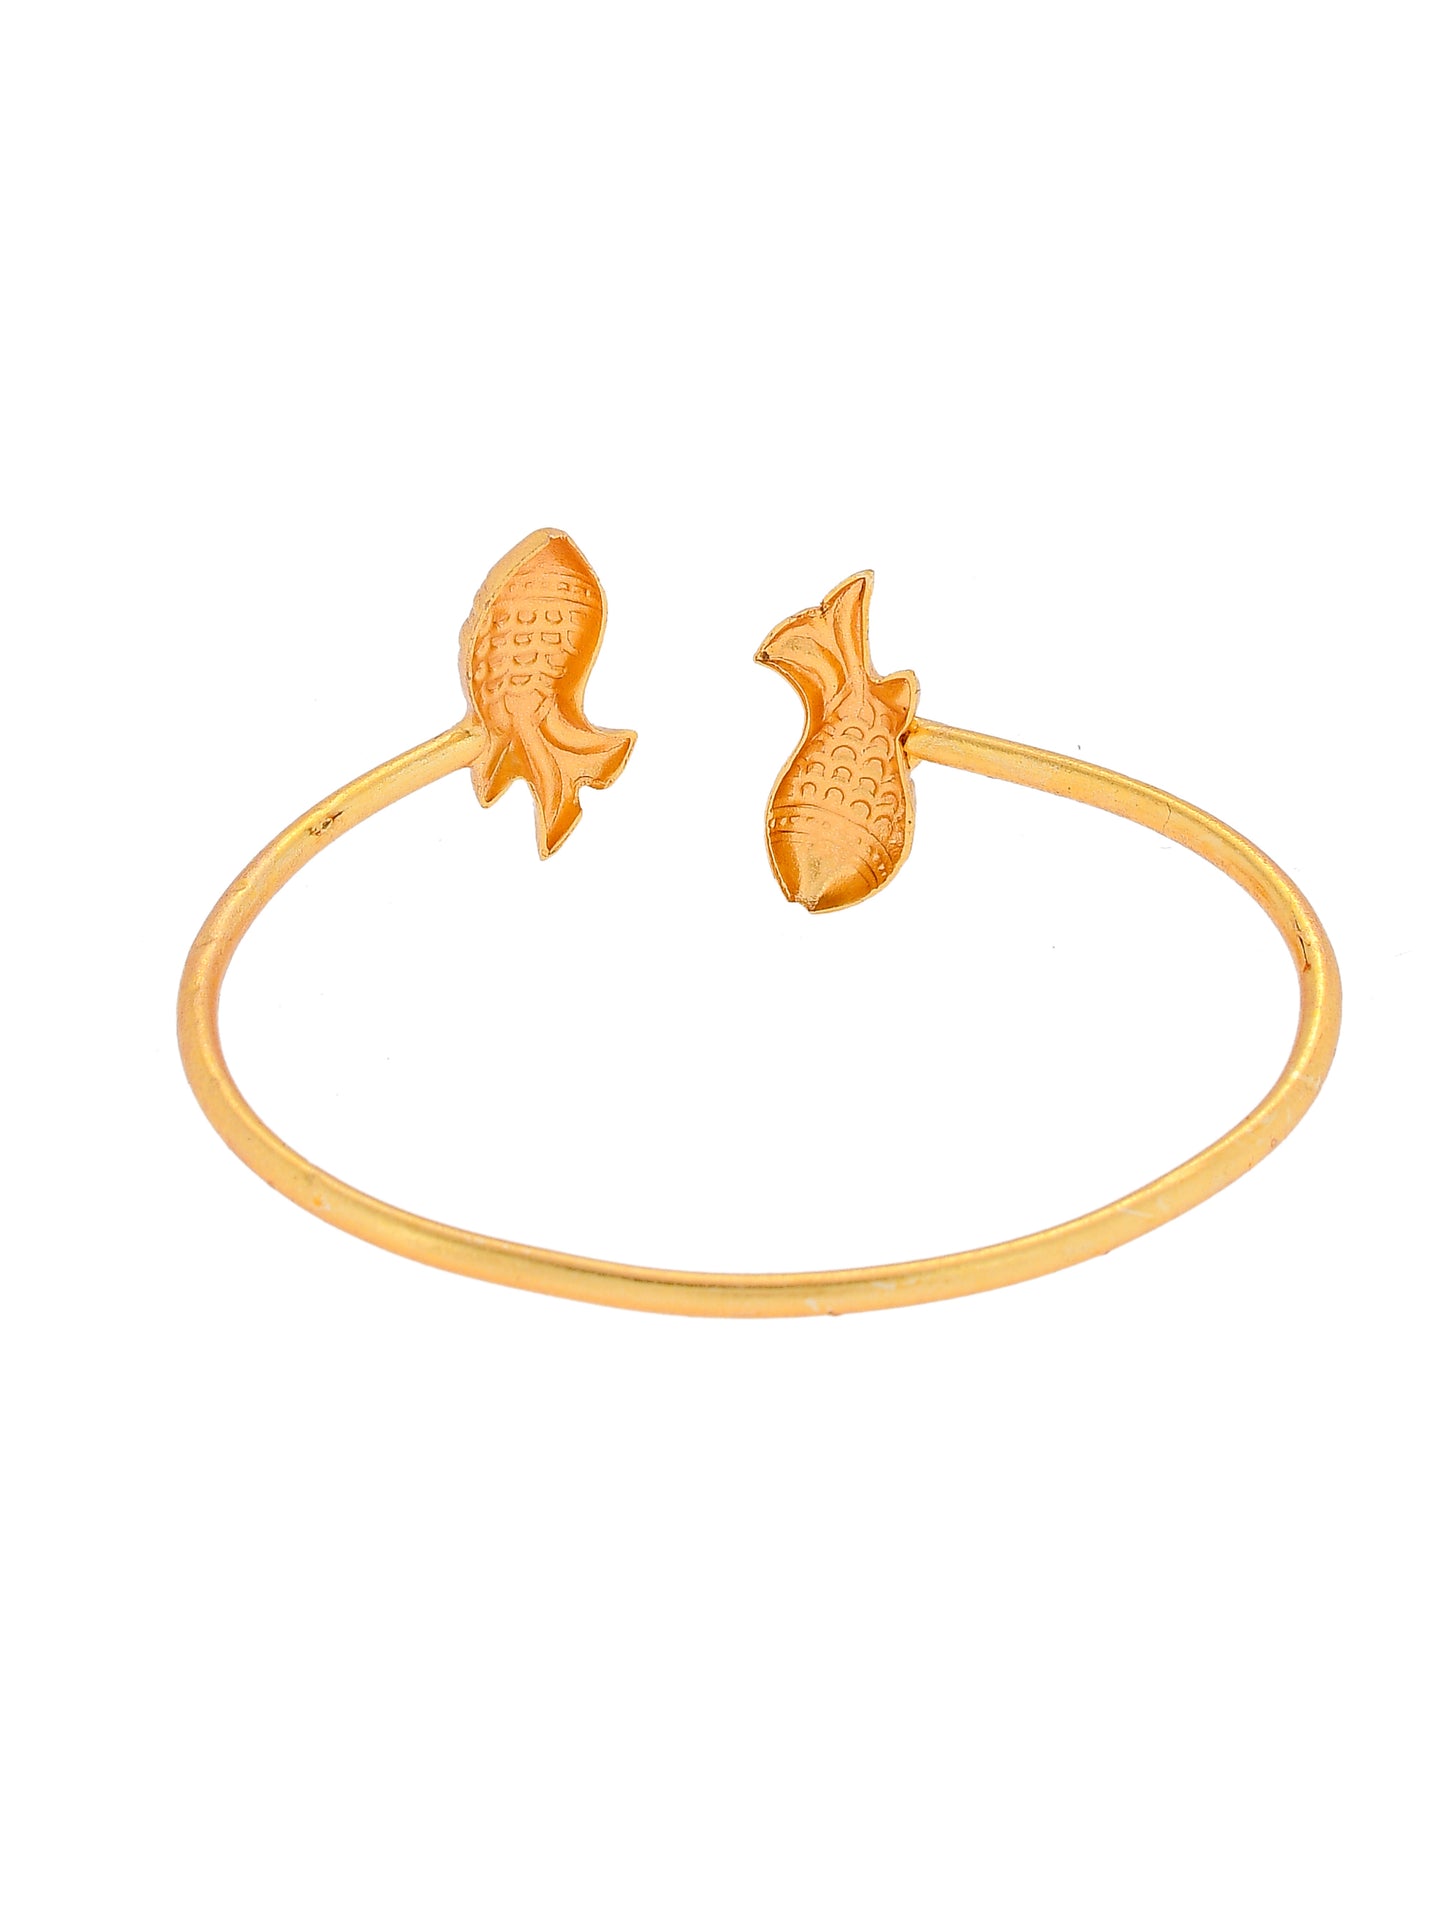 Gold Plated Fish Charm Handcrafted Bracelet